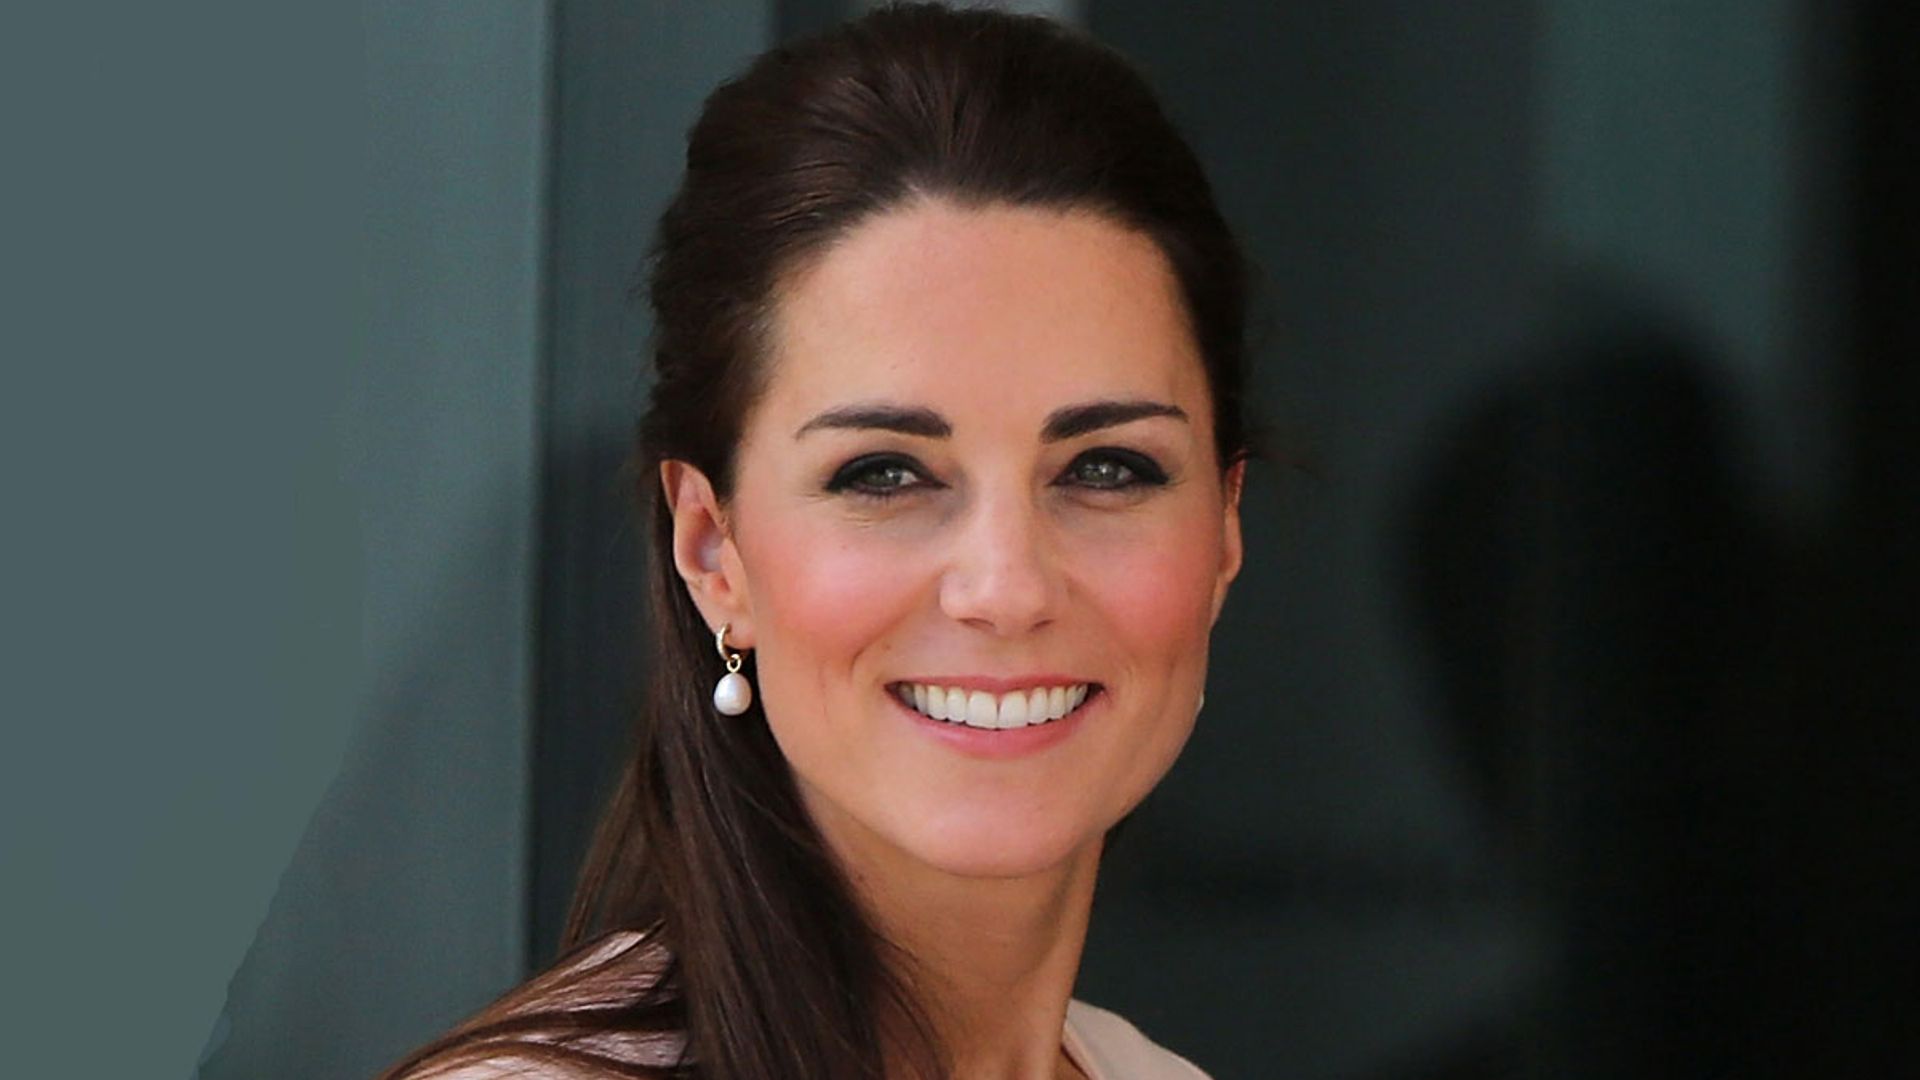 Kate Middleton’s fan favourite Ghost dress is available in pink at John Lewis – hurry